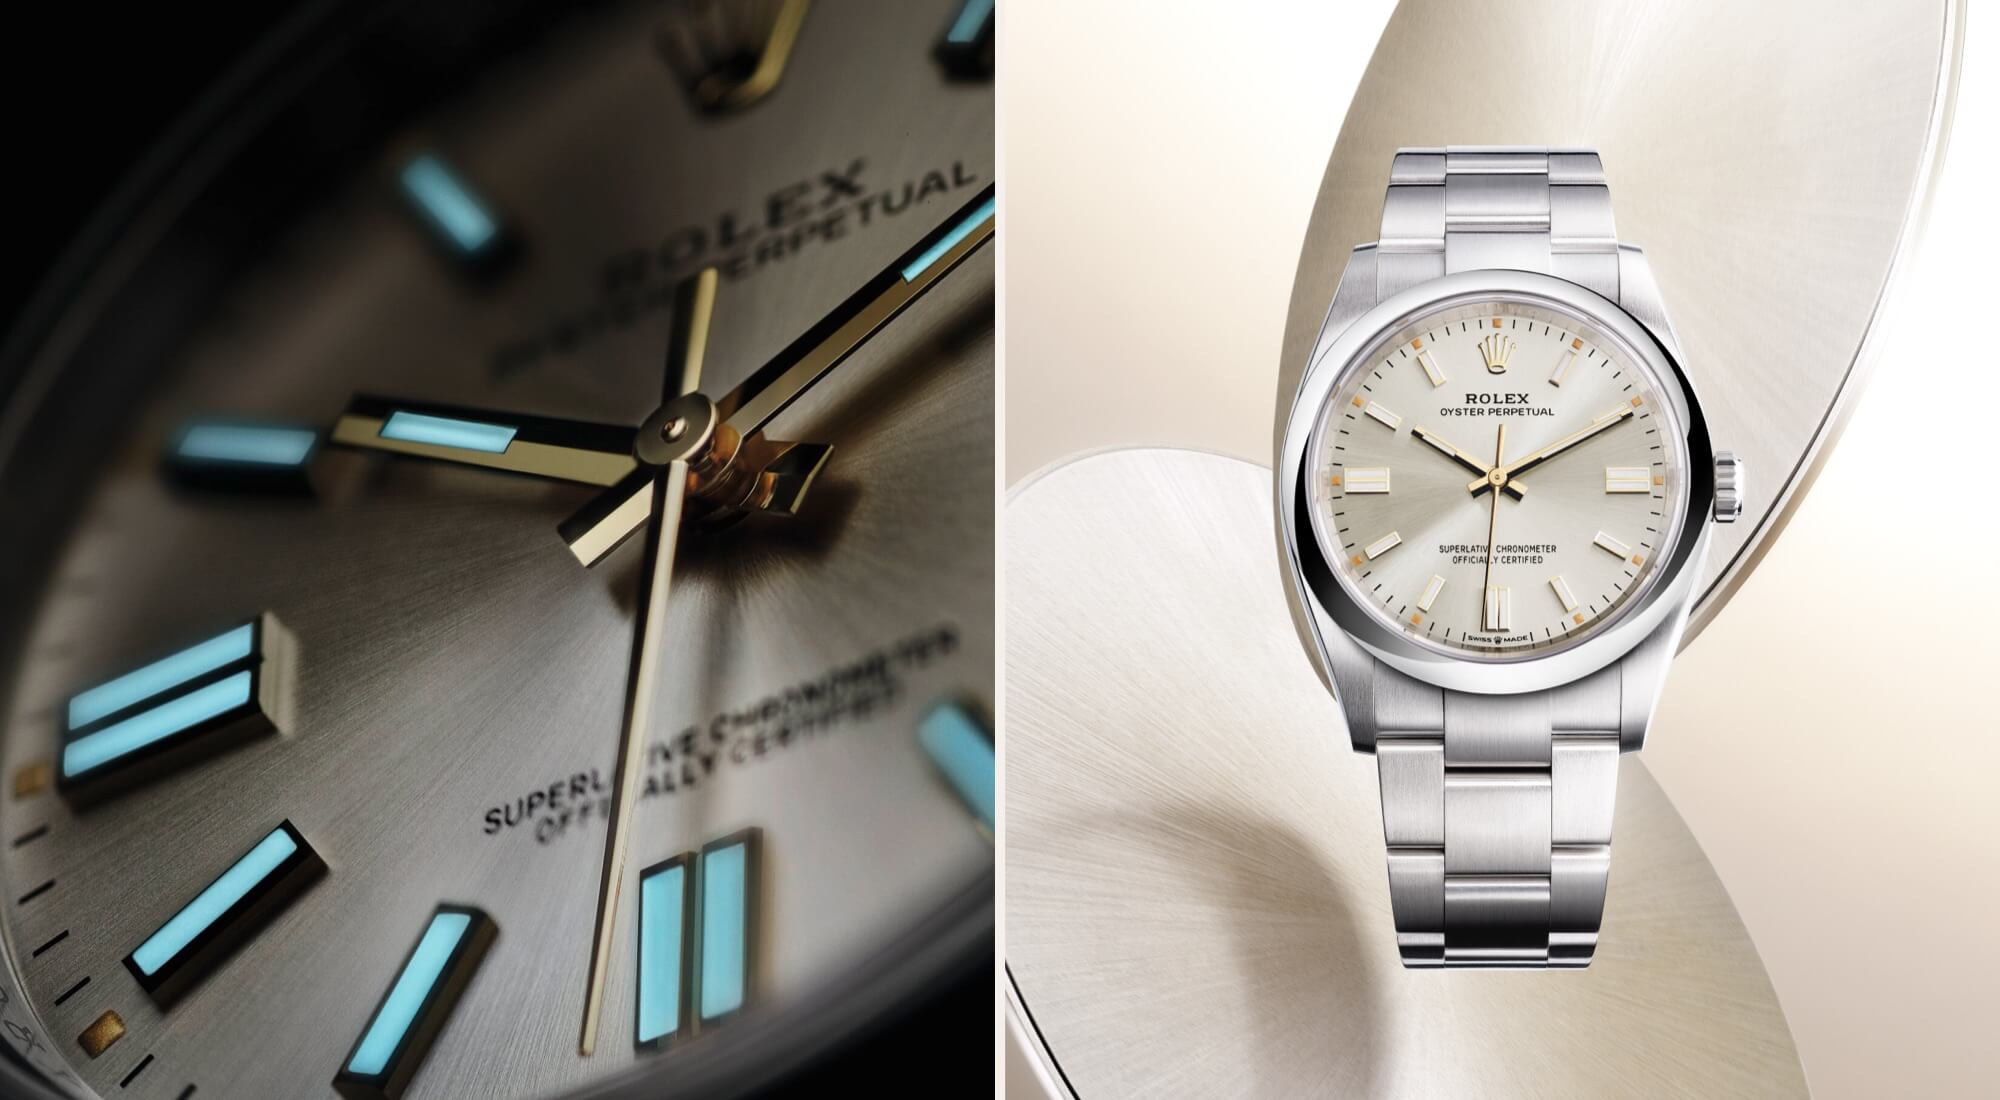 rolex oyster perpetual watches - global watch company